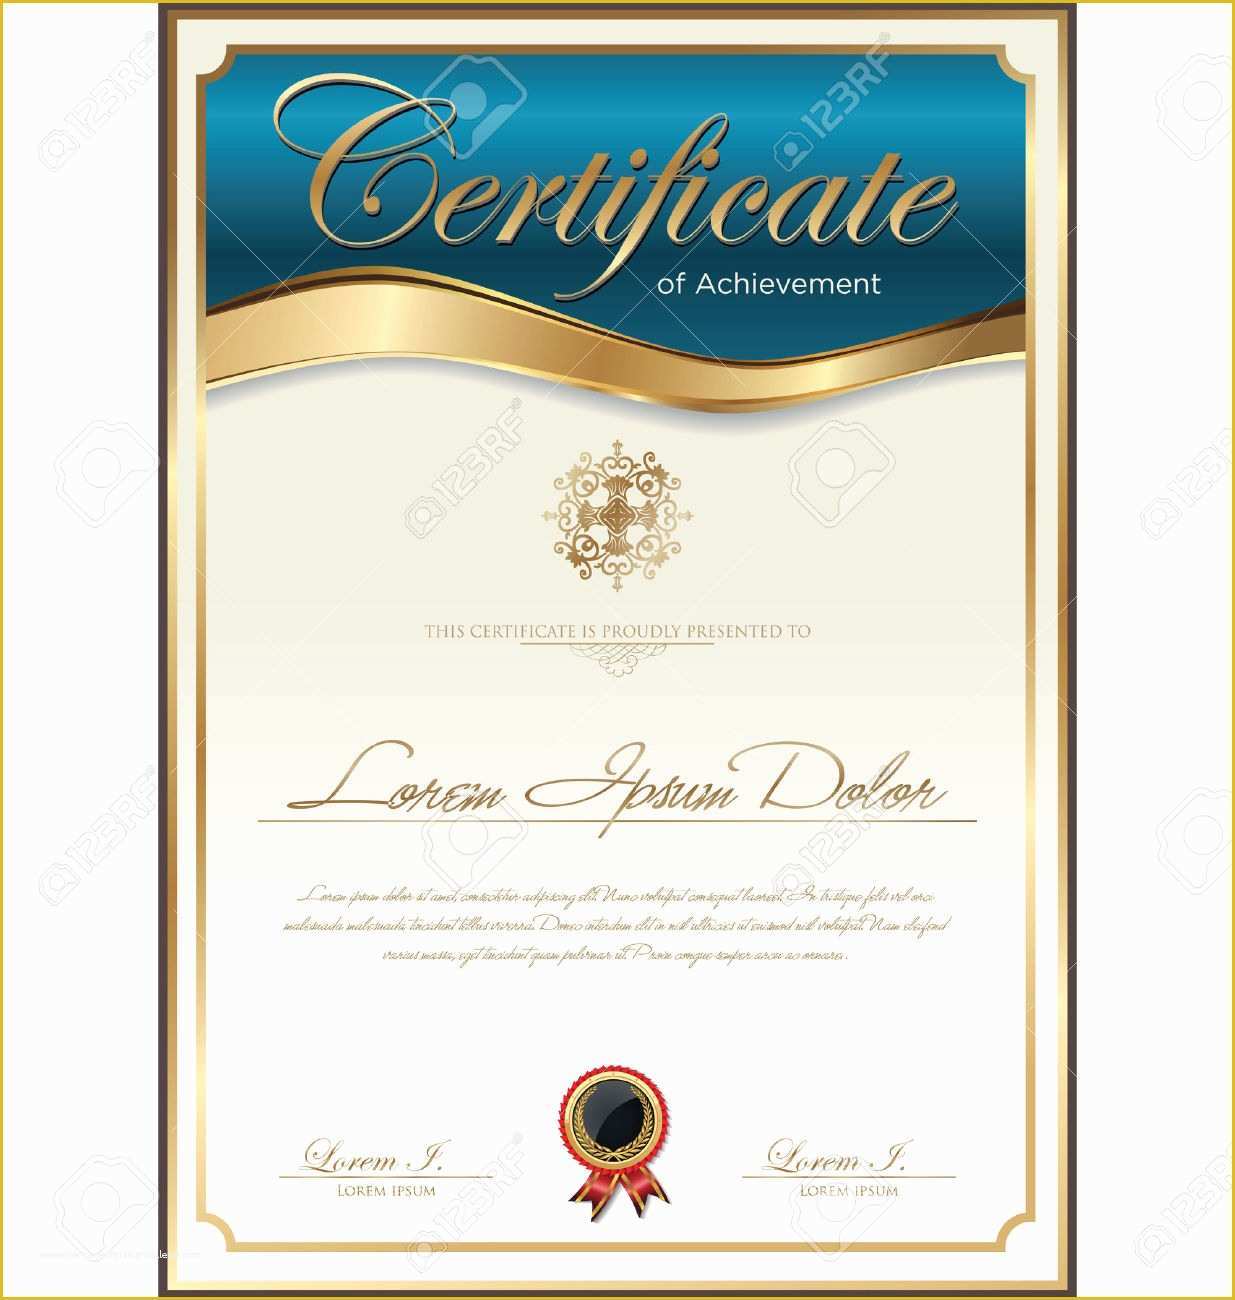 Award Certificate Template Free Of Certificate Templates Fotolip Rich Image and Wallpaper